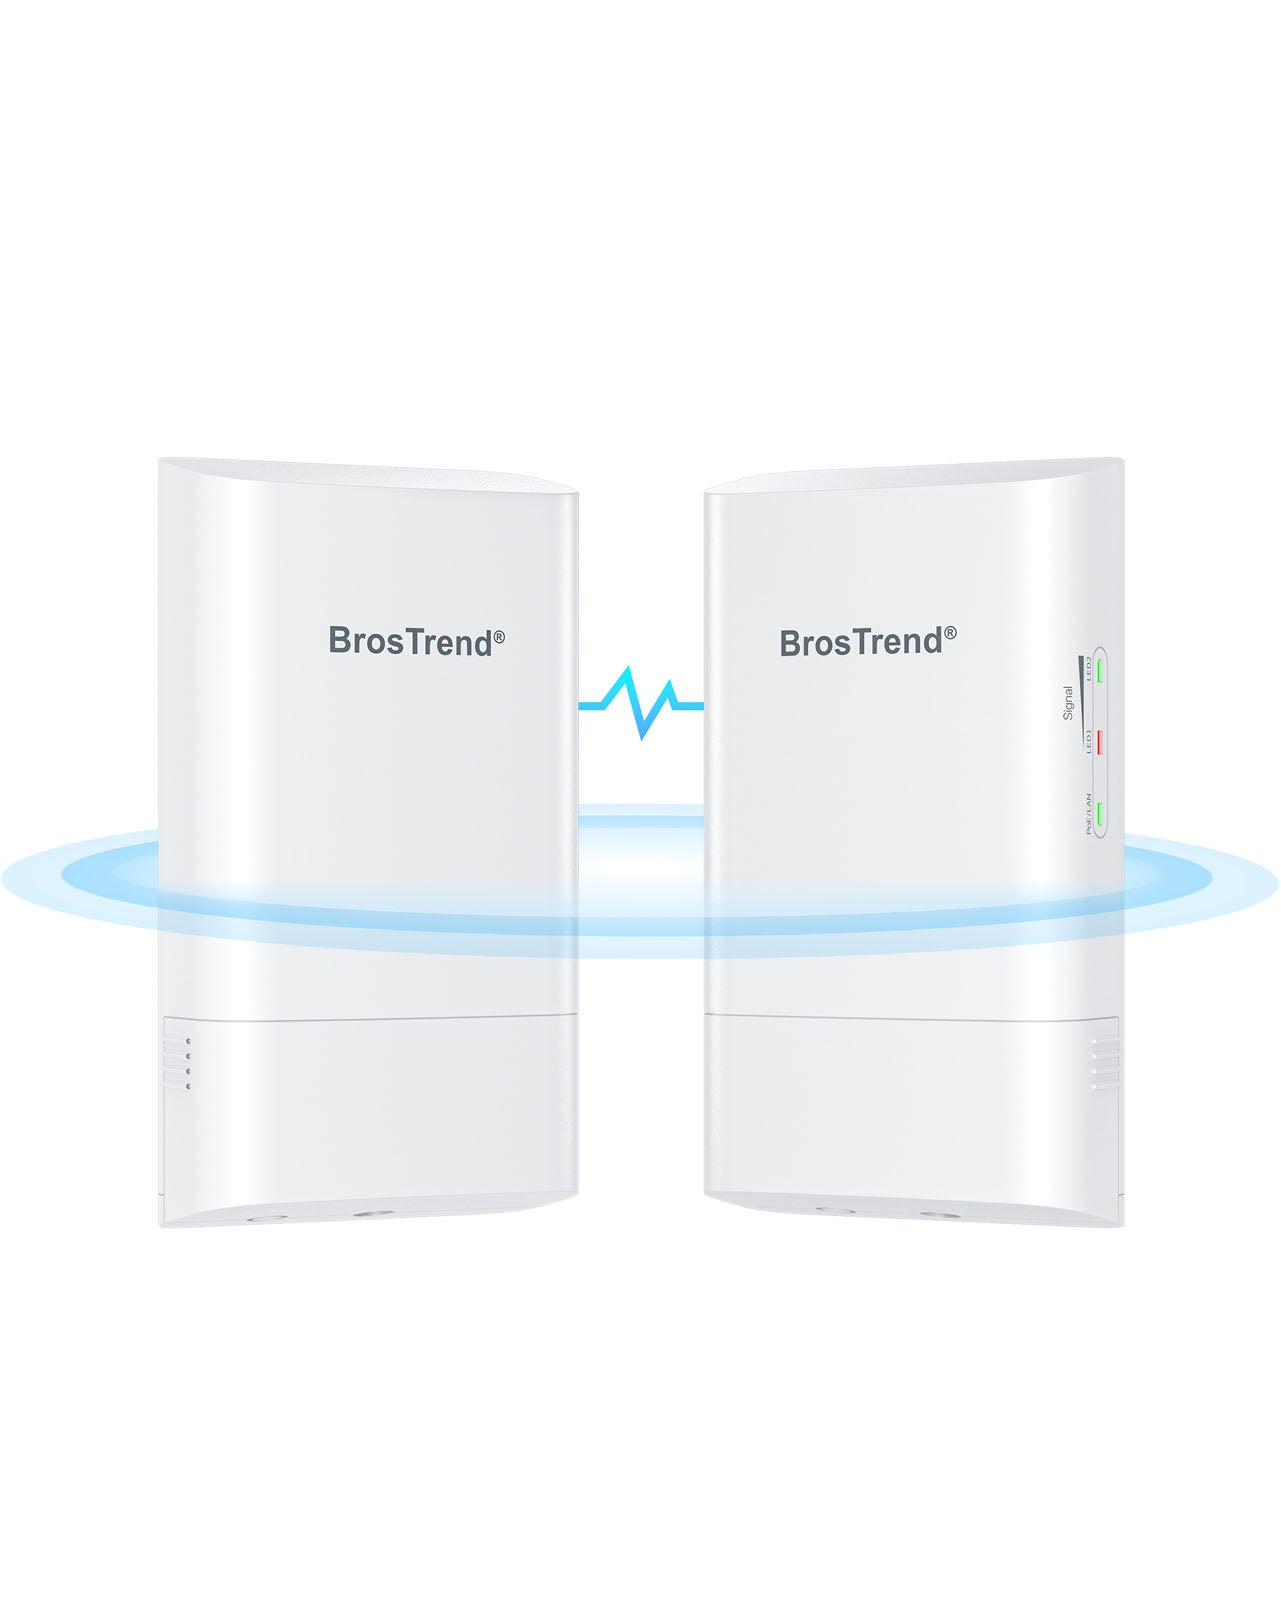 BrosTrend 1 km Outdoor WiFi Bridge Kit Transfers Data Wirelessly up to 1 Kilometer at a Speed of Up to 867 Mbps on 5GHz Band Includes Two Pieces with One Working as AP Transmitter and the Other as Station Receiver Supports Point to Point PtP Multipoint PtMP Connection